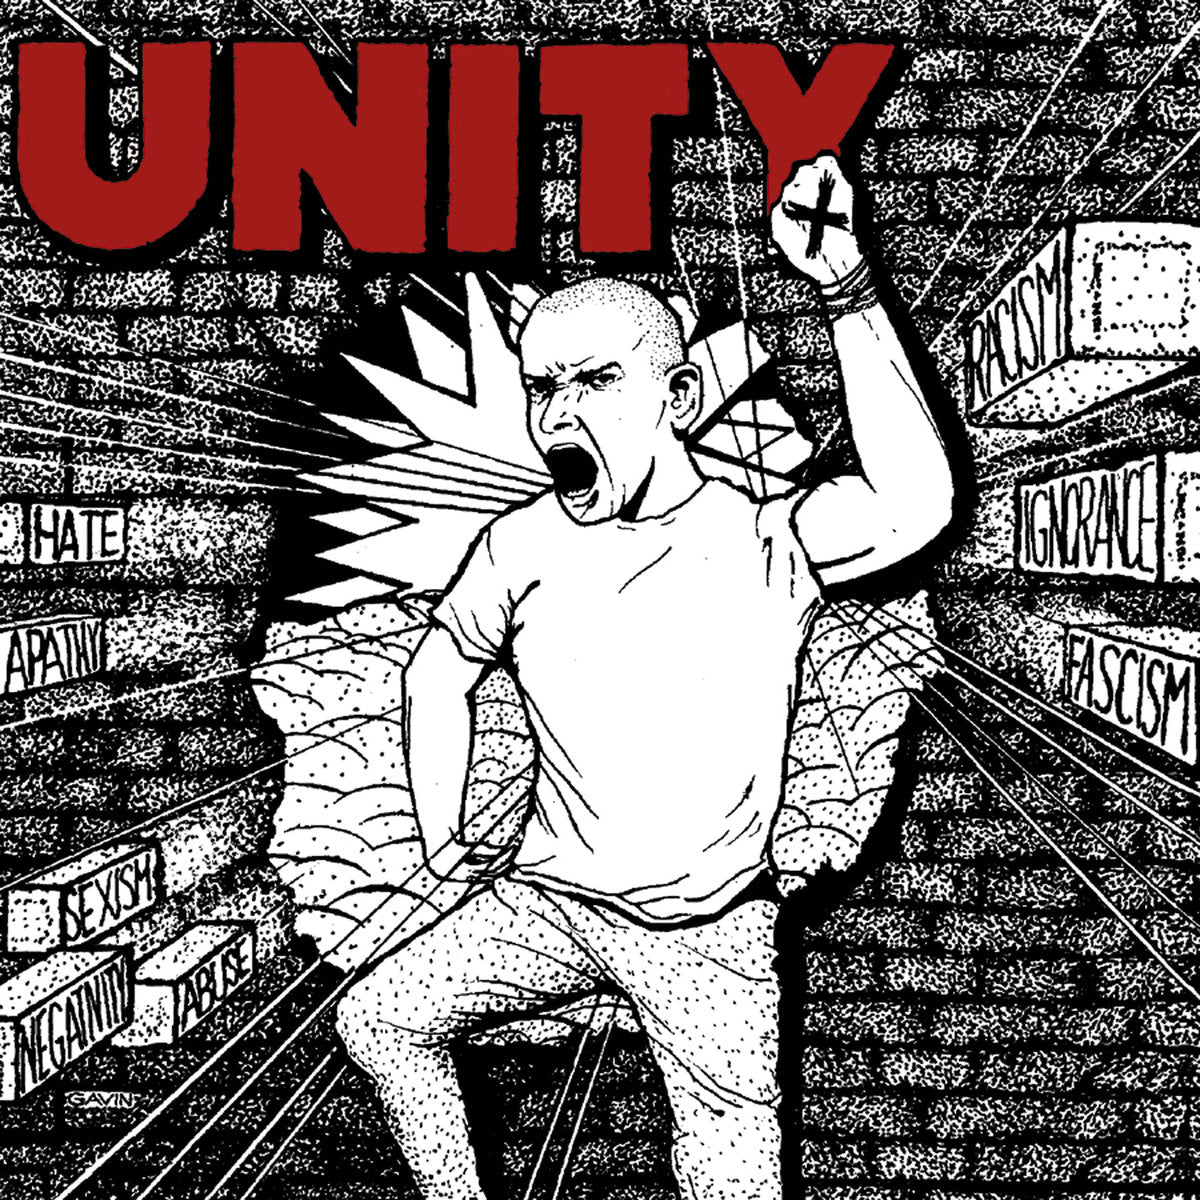 UNITY 'You Are One' 7" / WHITE EDITION